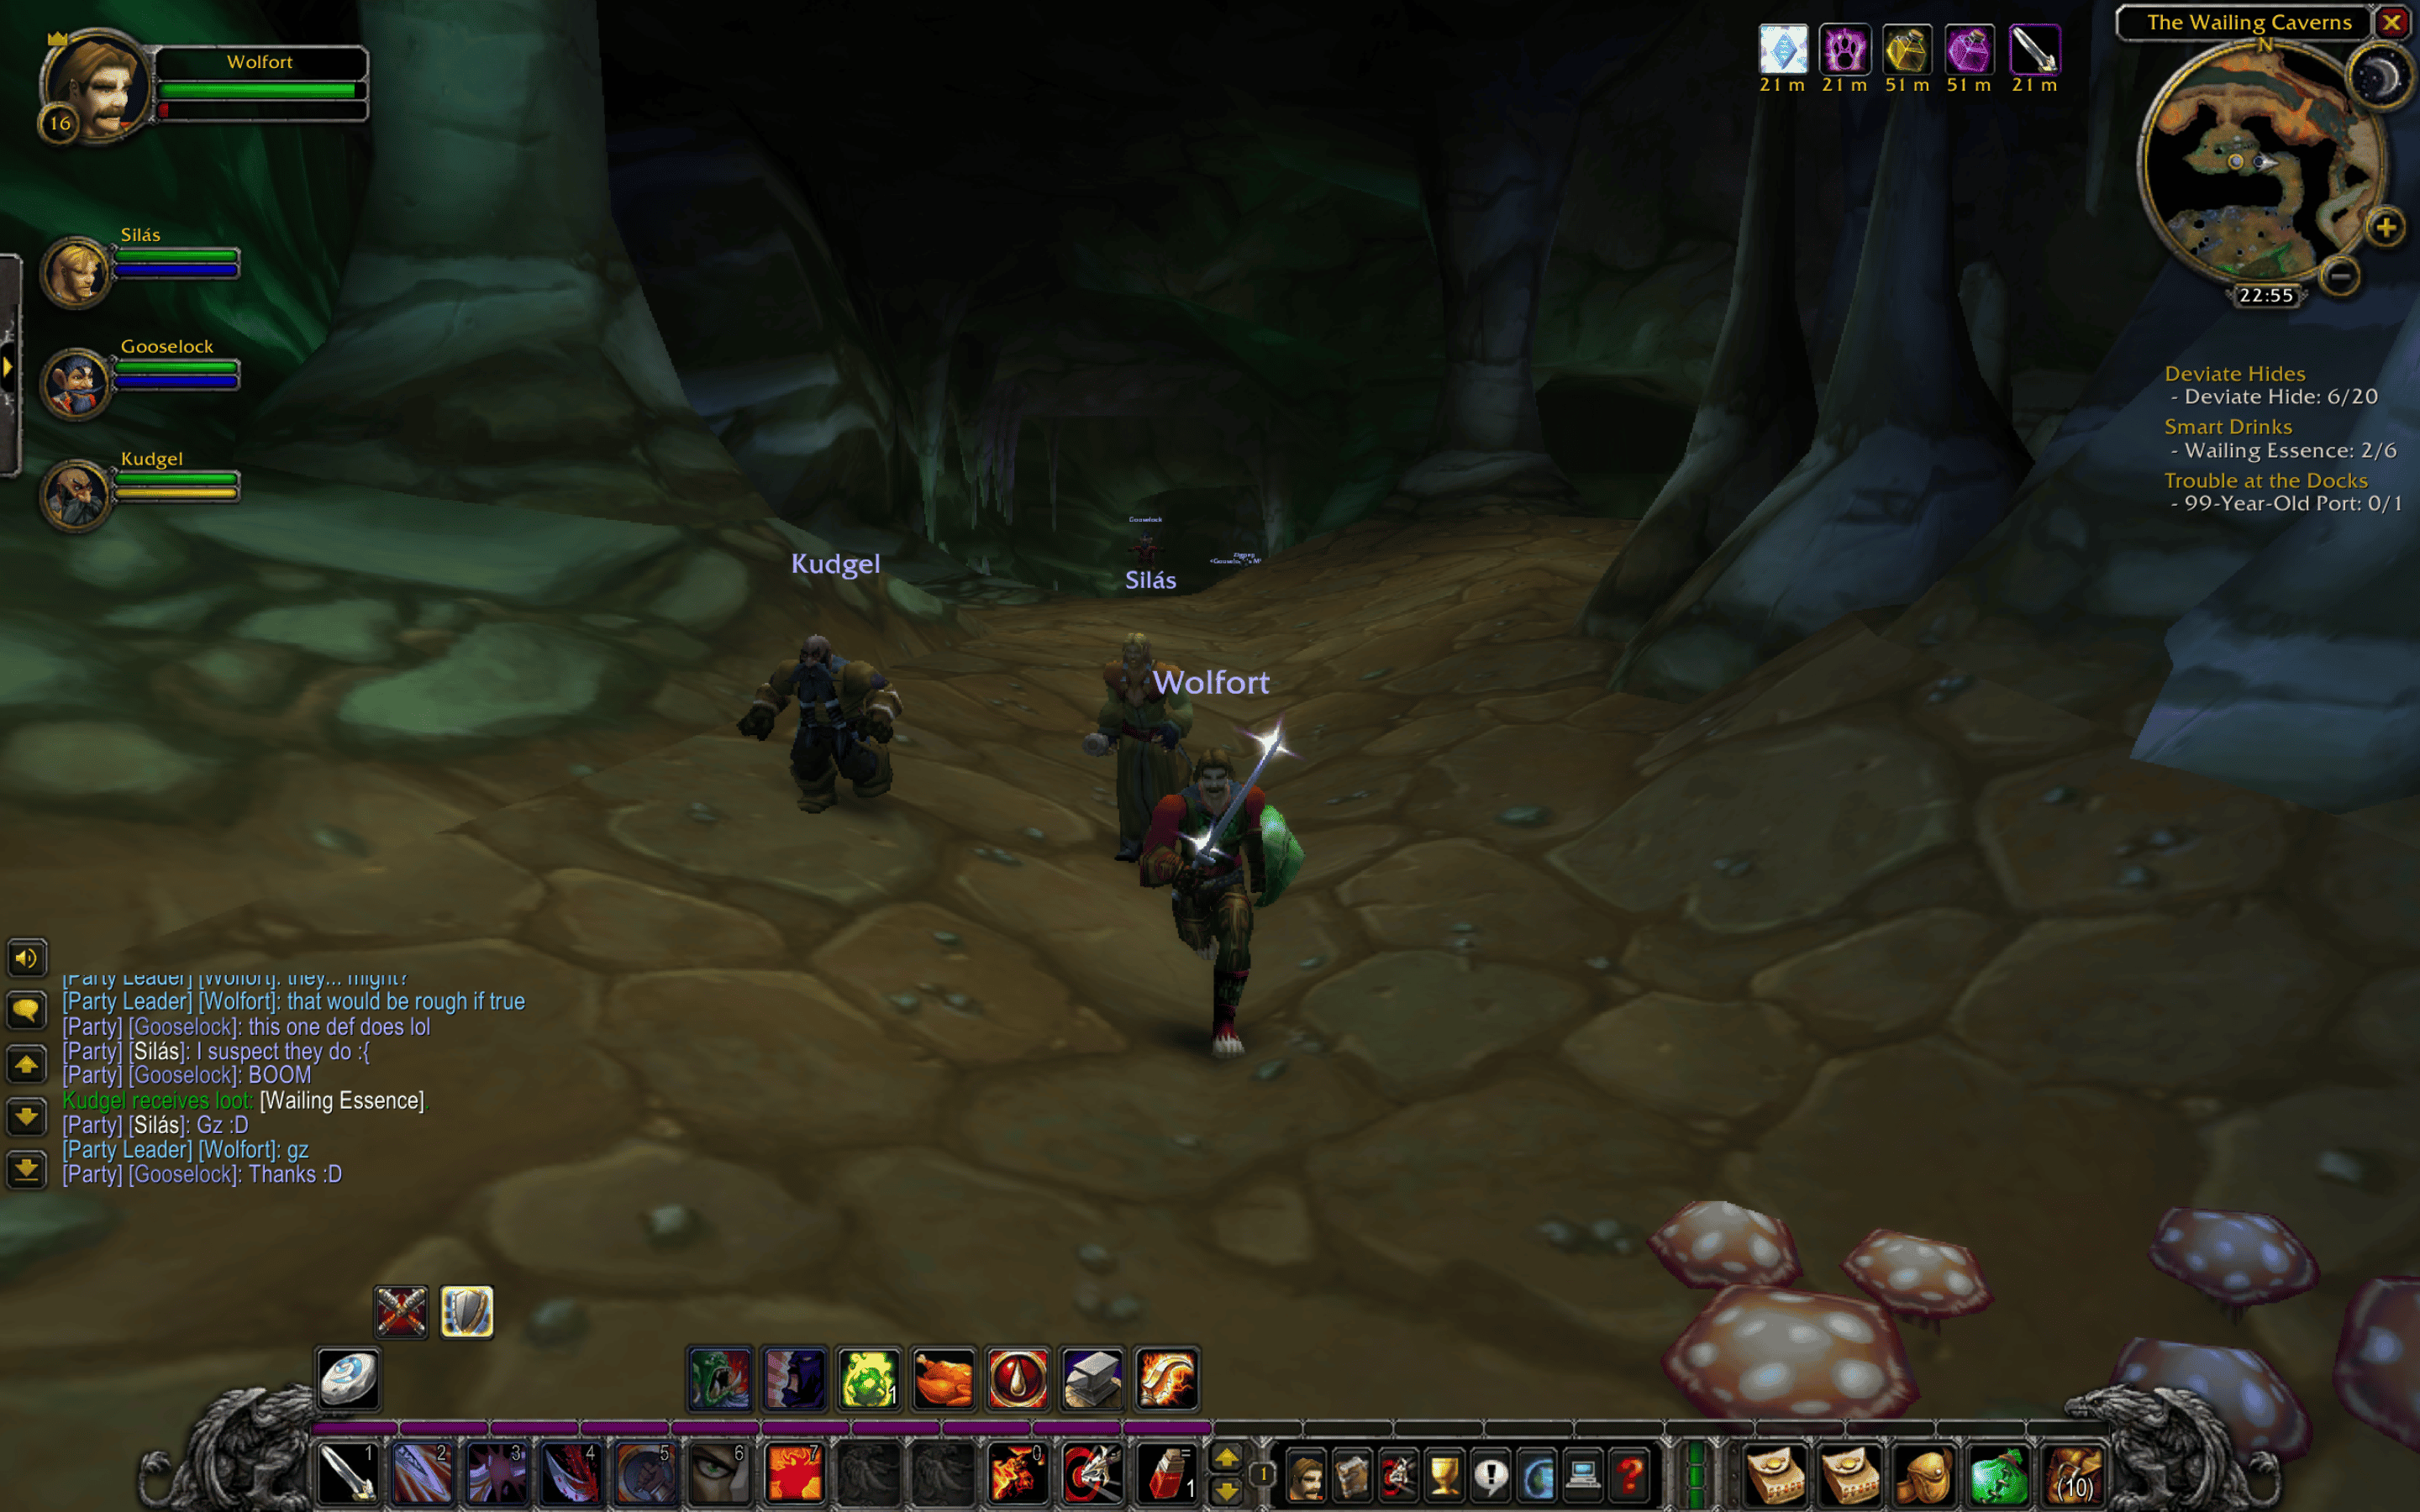 World of warcraft wailing caverns - three characters with weapons run through a cave.